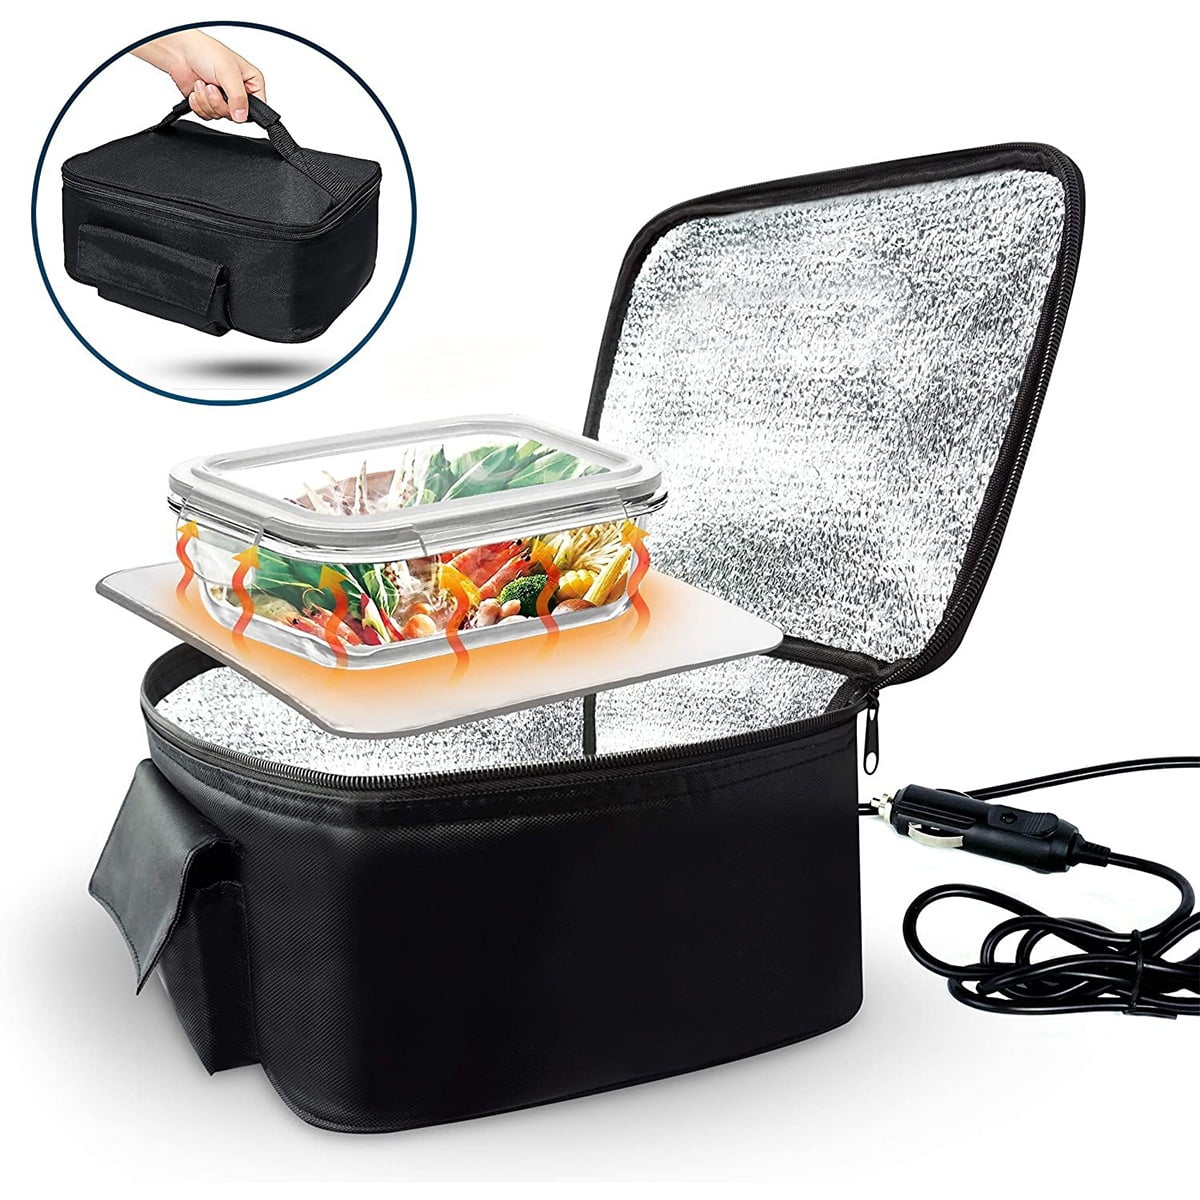 Protable Personal DC 12V Auto Electric Lunch Box Mini Food Heating Bag Oven 